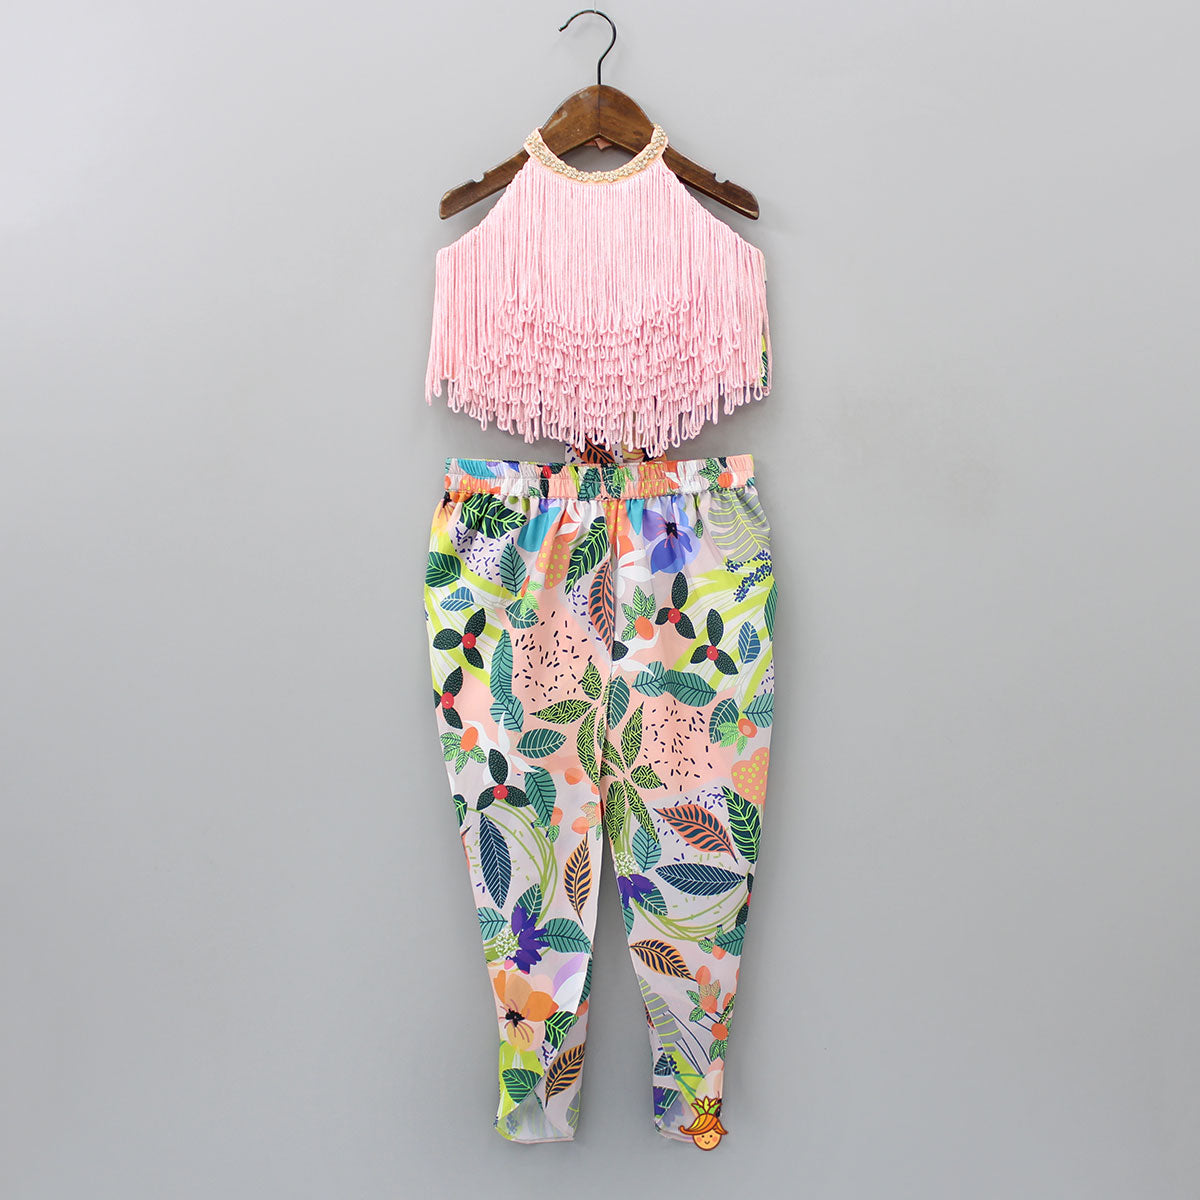 Pre Order: Halter Neck Open Back Peach Top And Printed Multicolour Dhoti Style Tulip Pant